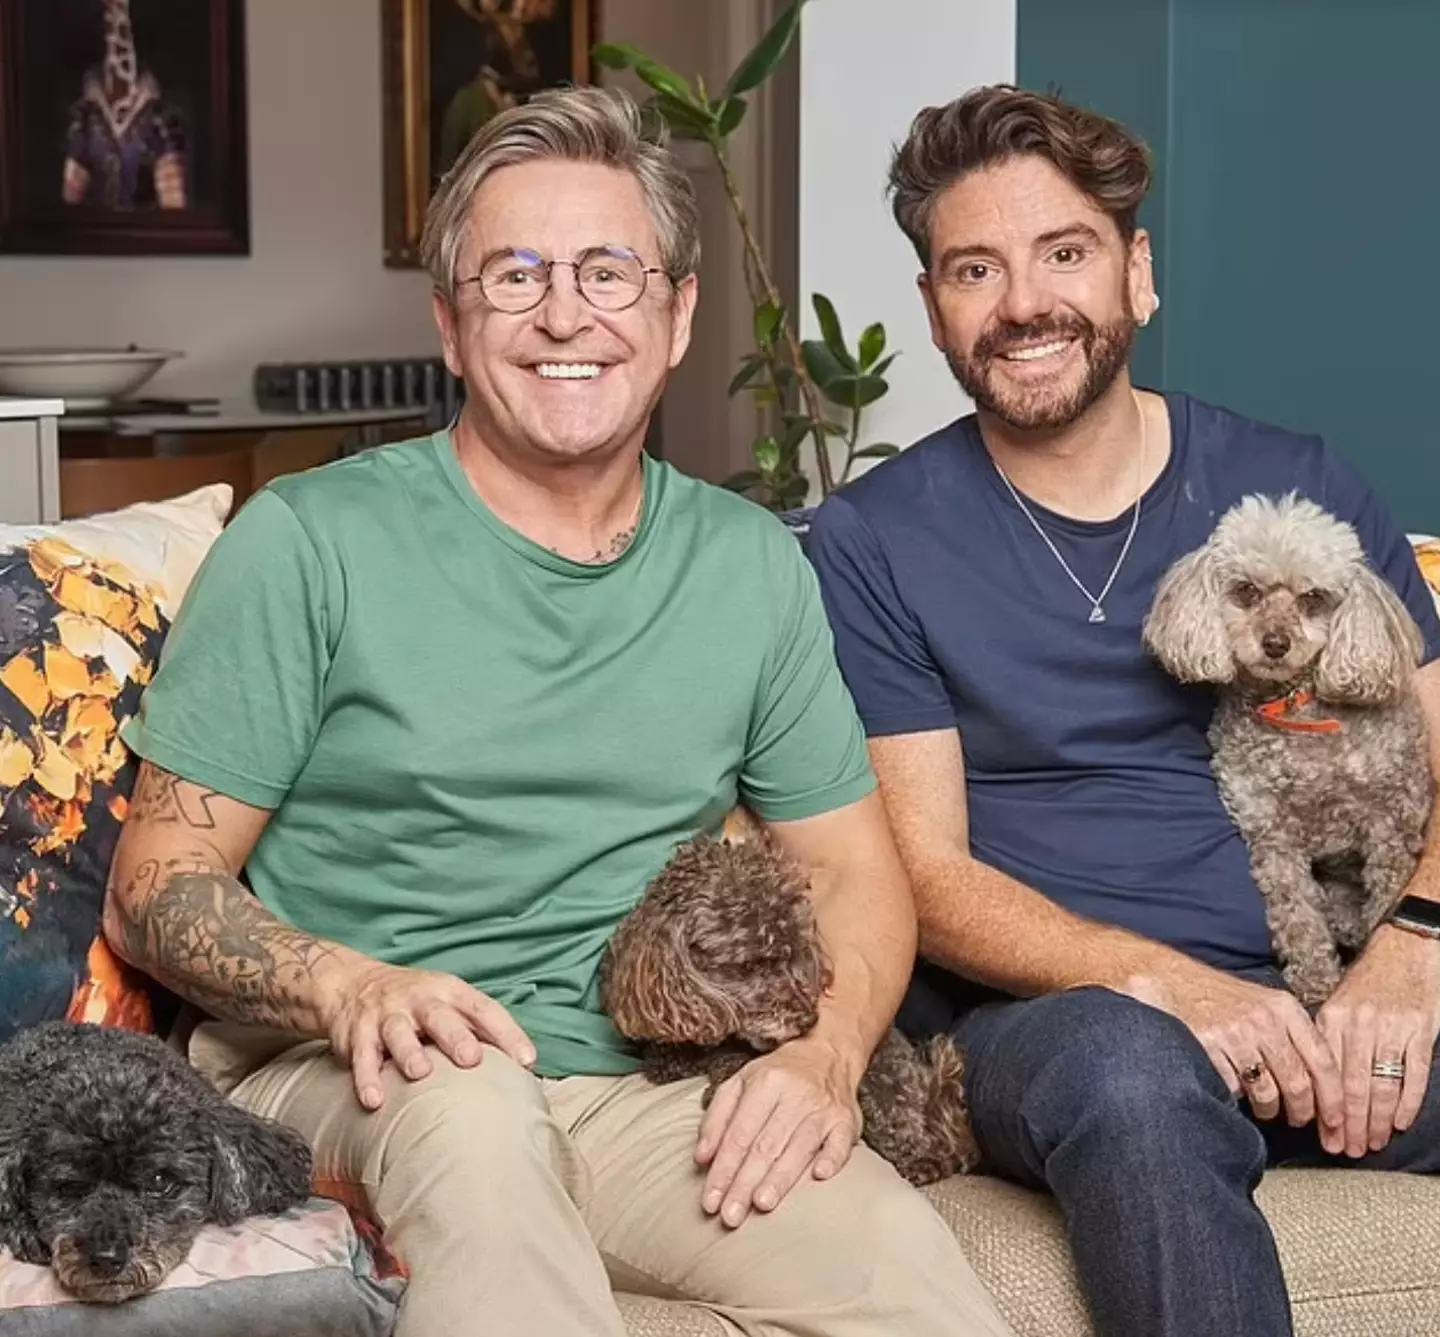 Gogglebox's Stephen and Daniel announced their divorce at the weekend. (Channel 4)